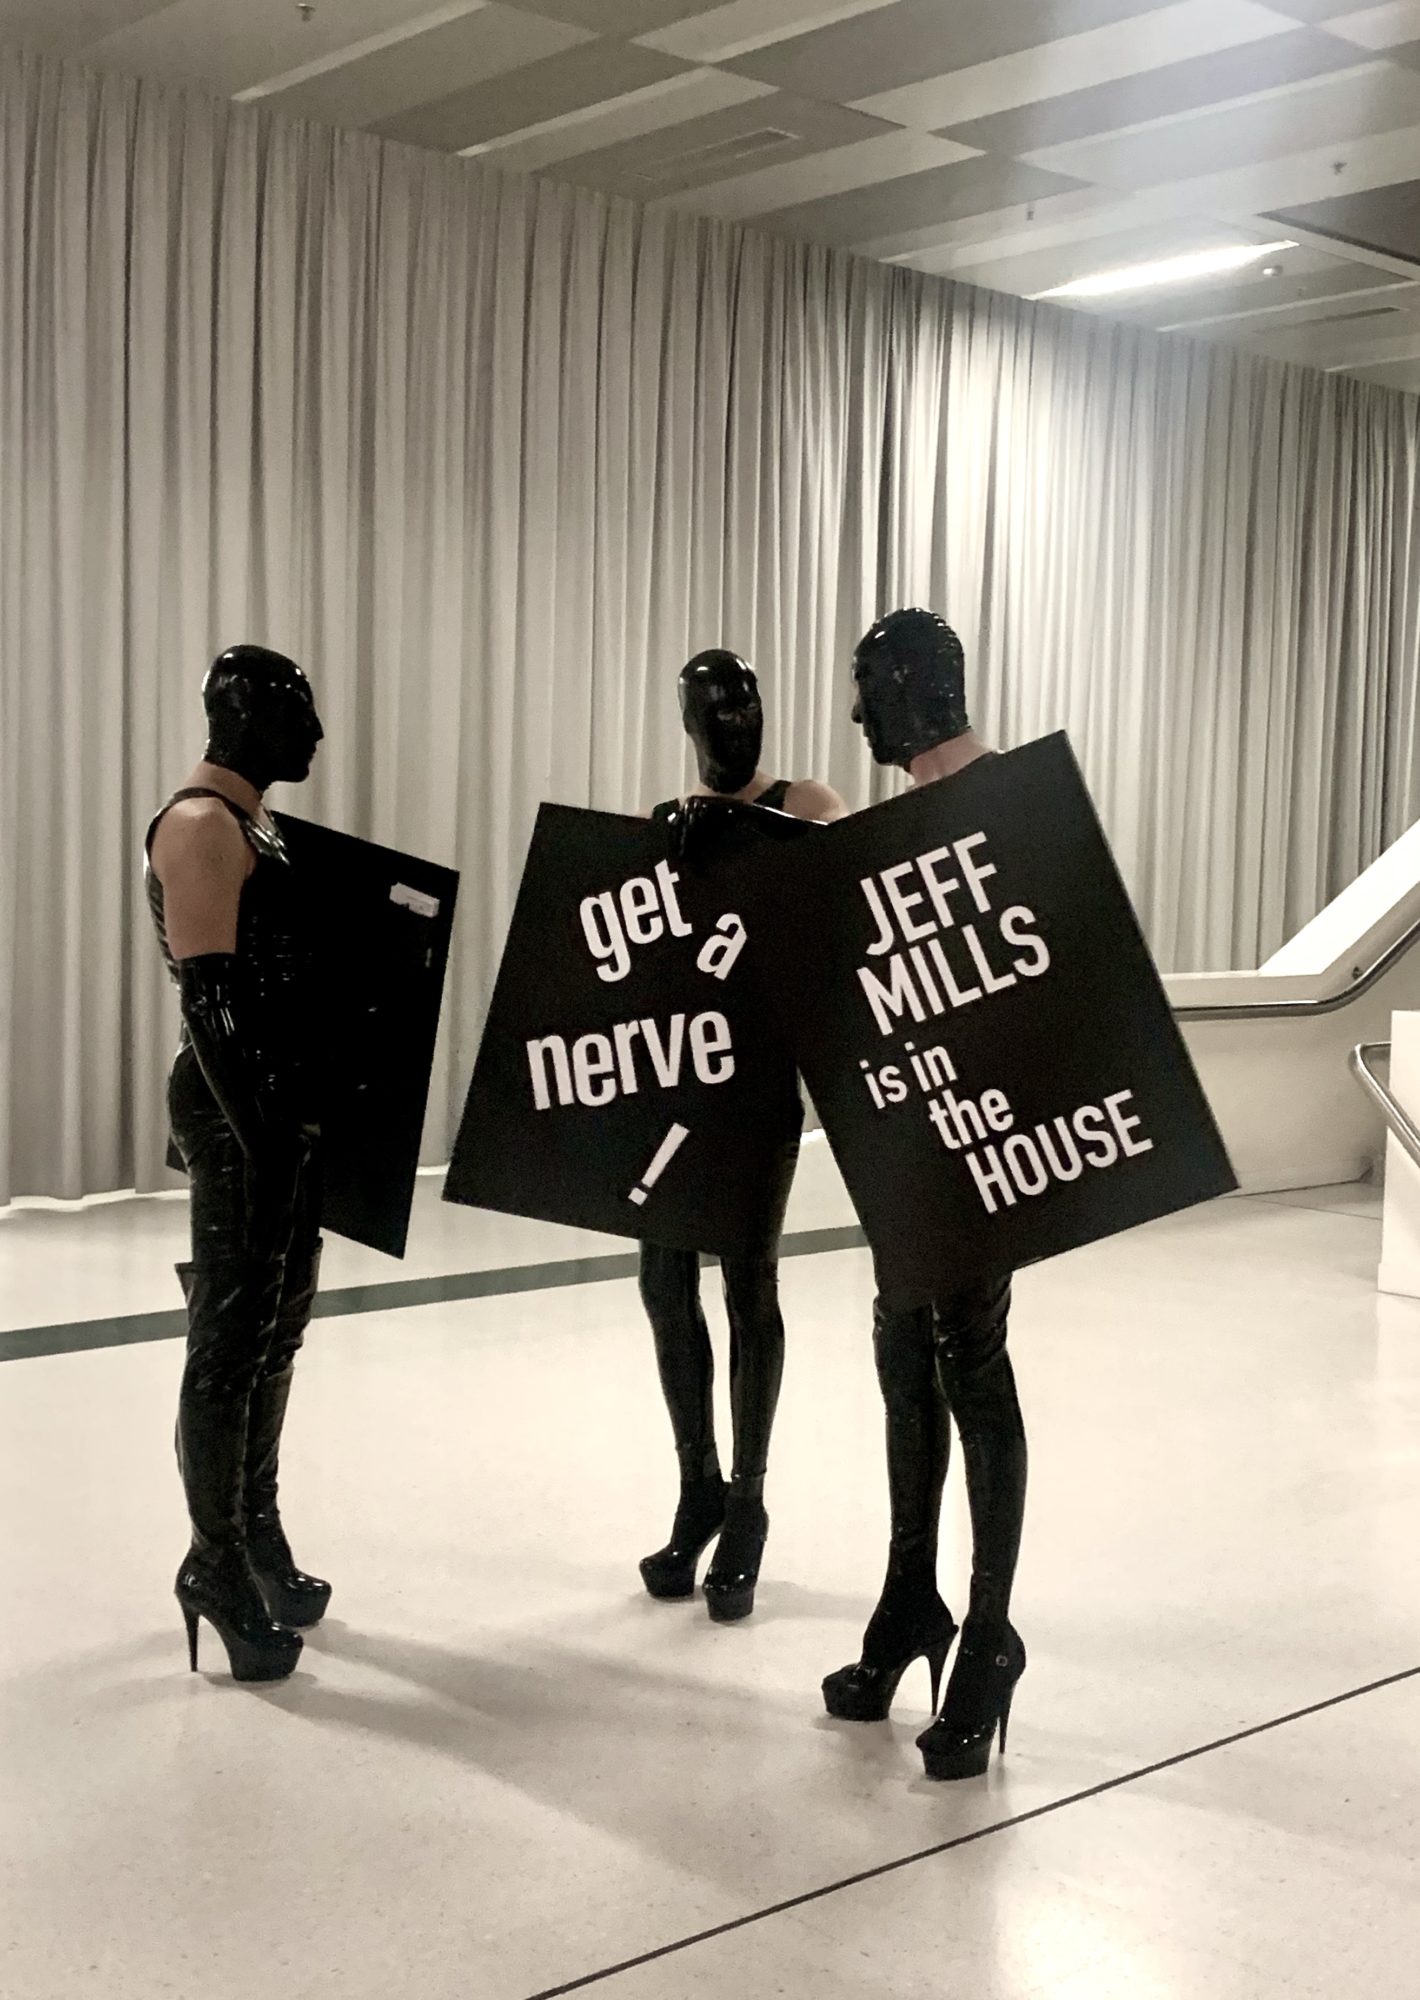 GET A NERVE! - WILD PANTHERS promoting the event at Artgenève, 2020